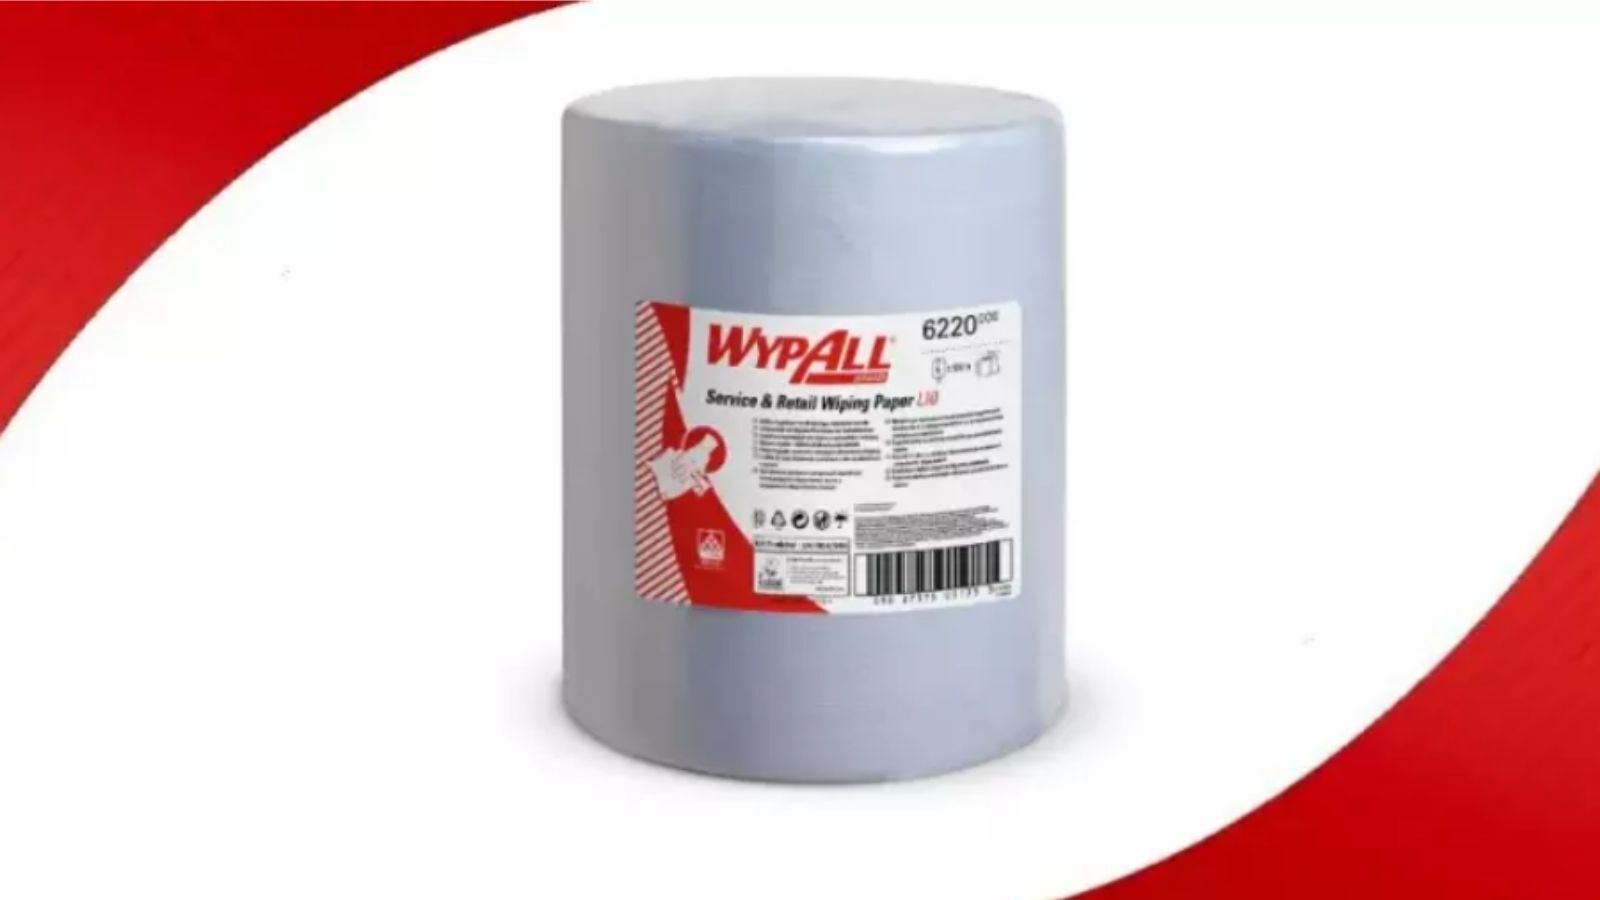 WypAll Brand-General Cleaning Wipes-6220-AU-v2.jpg